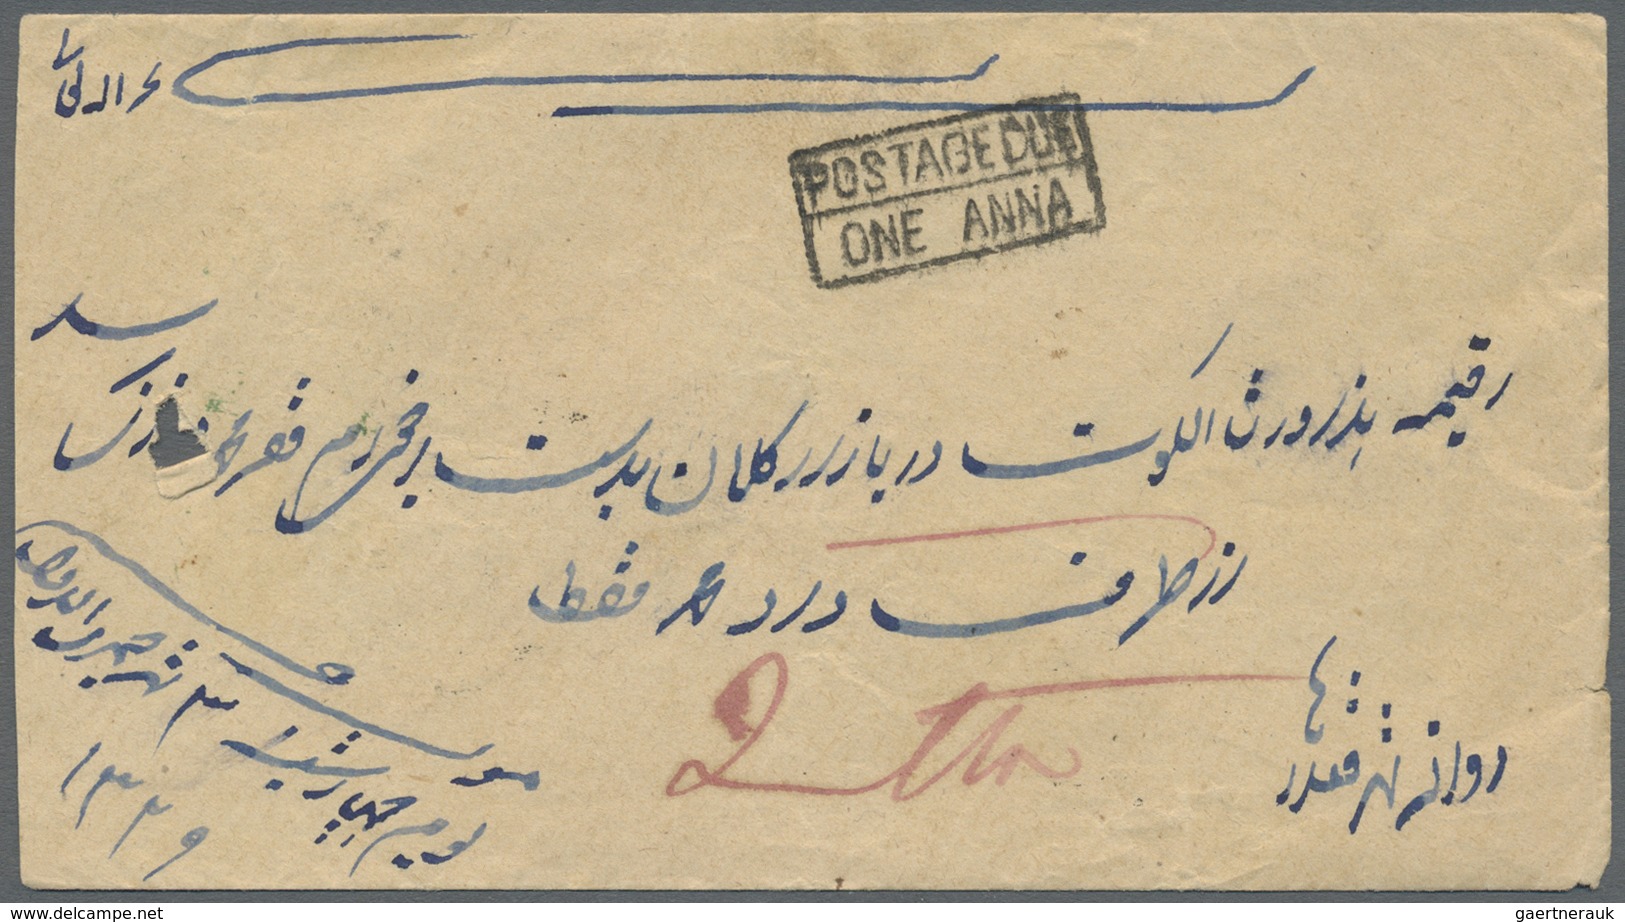 Br Afghanistan: 1909-25 "QUETTA UNPAID": Four covers to India via the southern Chaman-Quetta route but